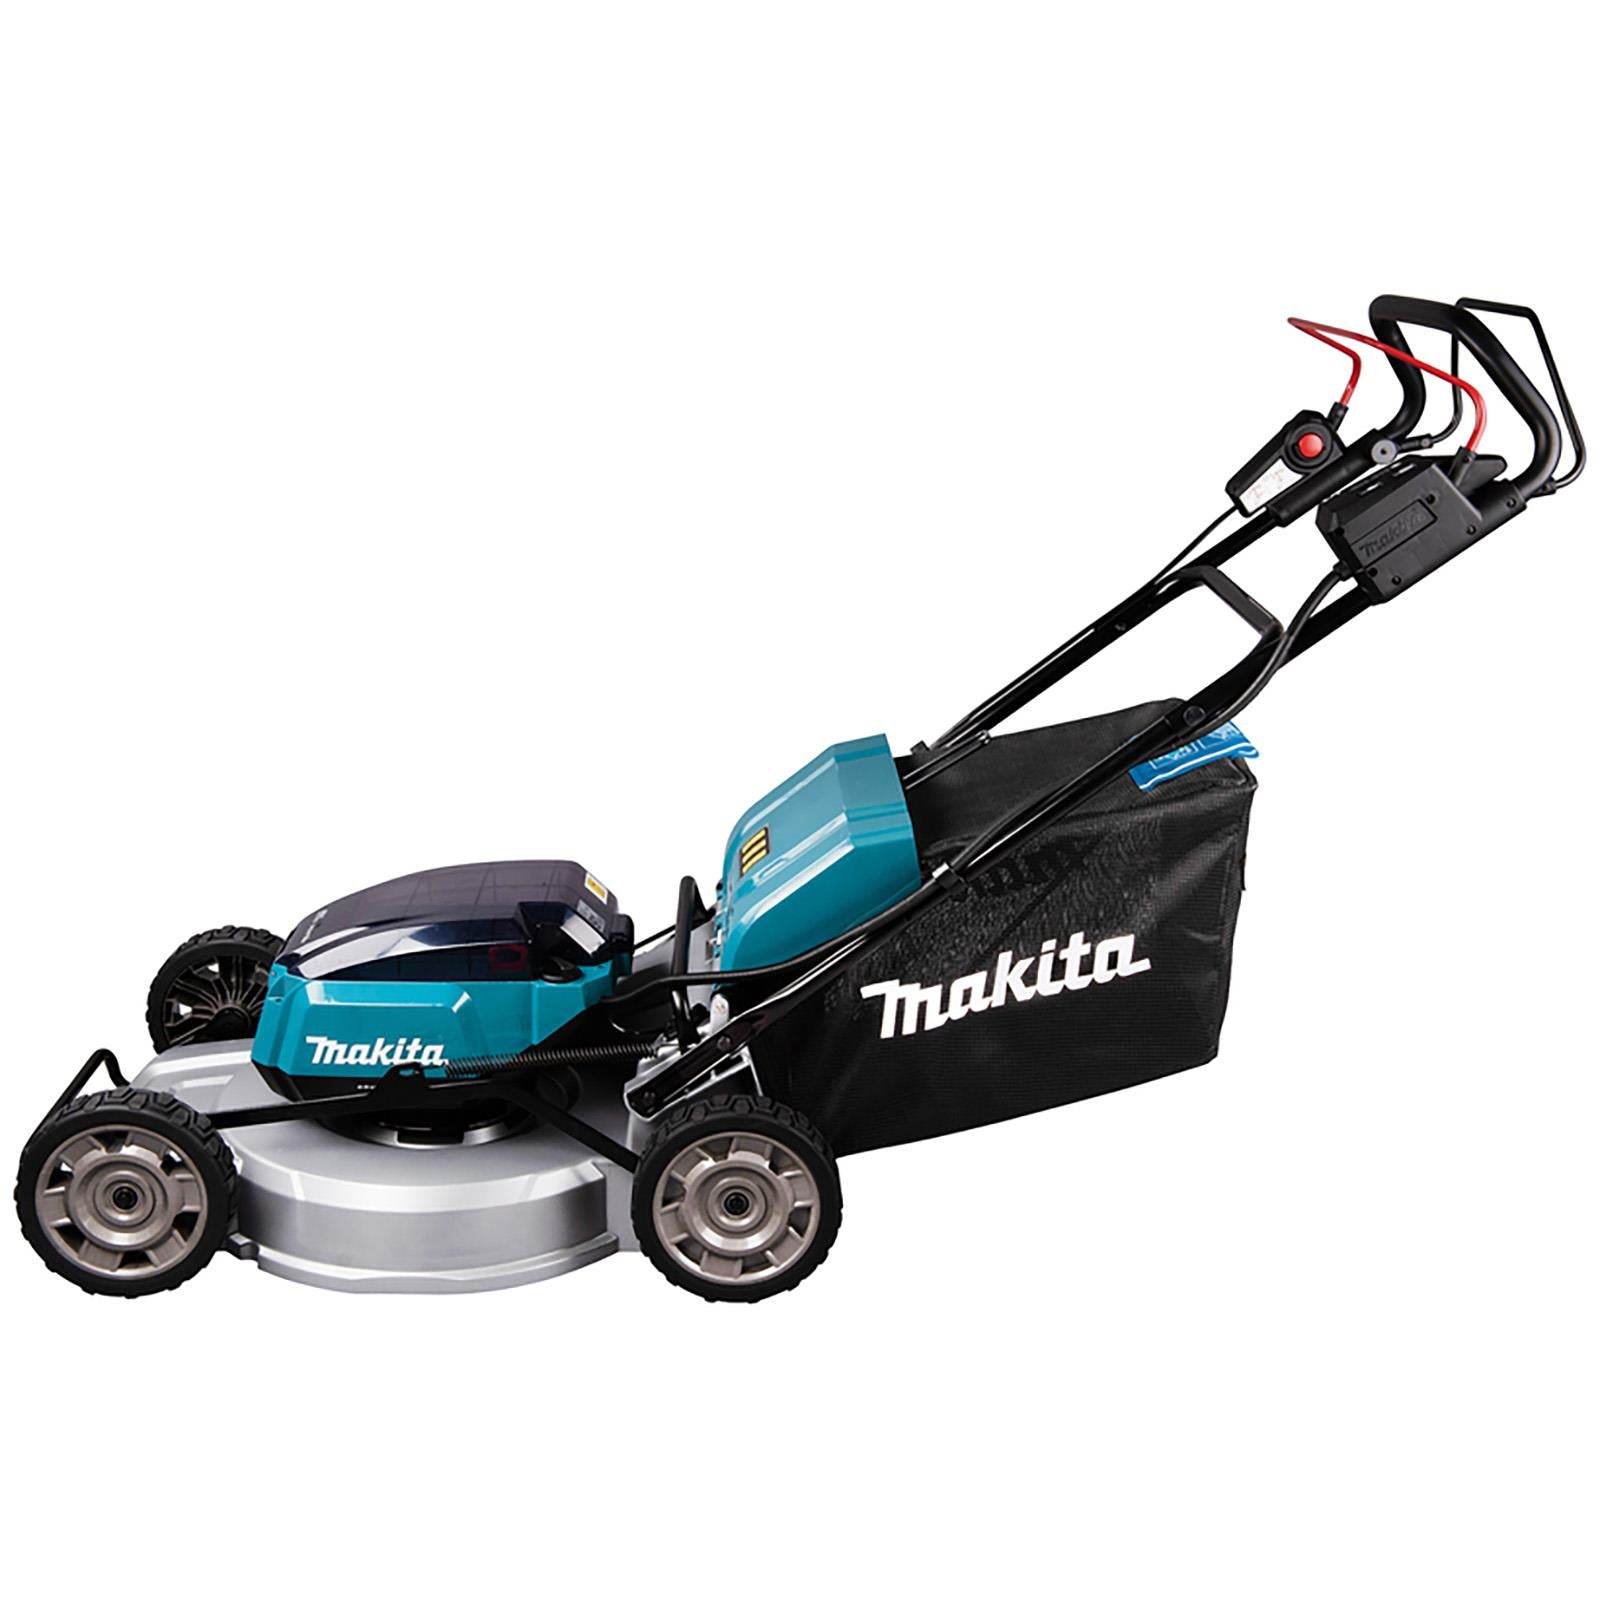 Makita 53cm Lawn Mower Kit Twin 18V LXT Li-ion Cordless Garden Grass Outdoor 2 x 6Ah Battery and Dual Rapid Charger DLM533PG2